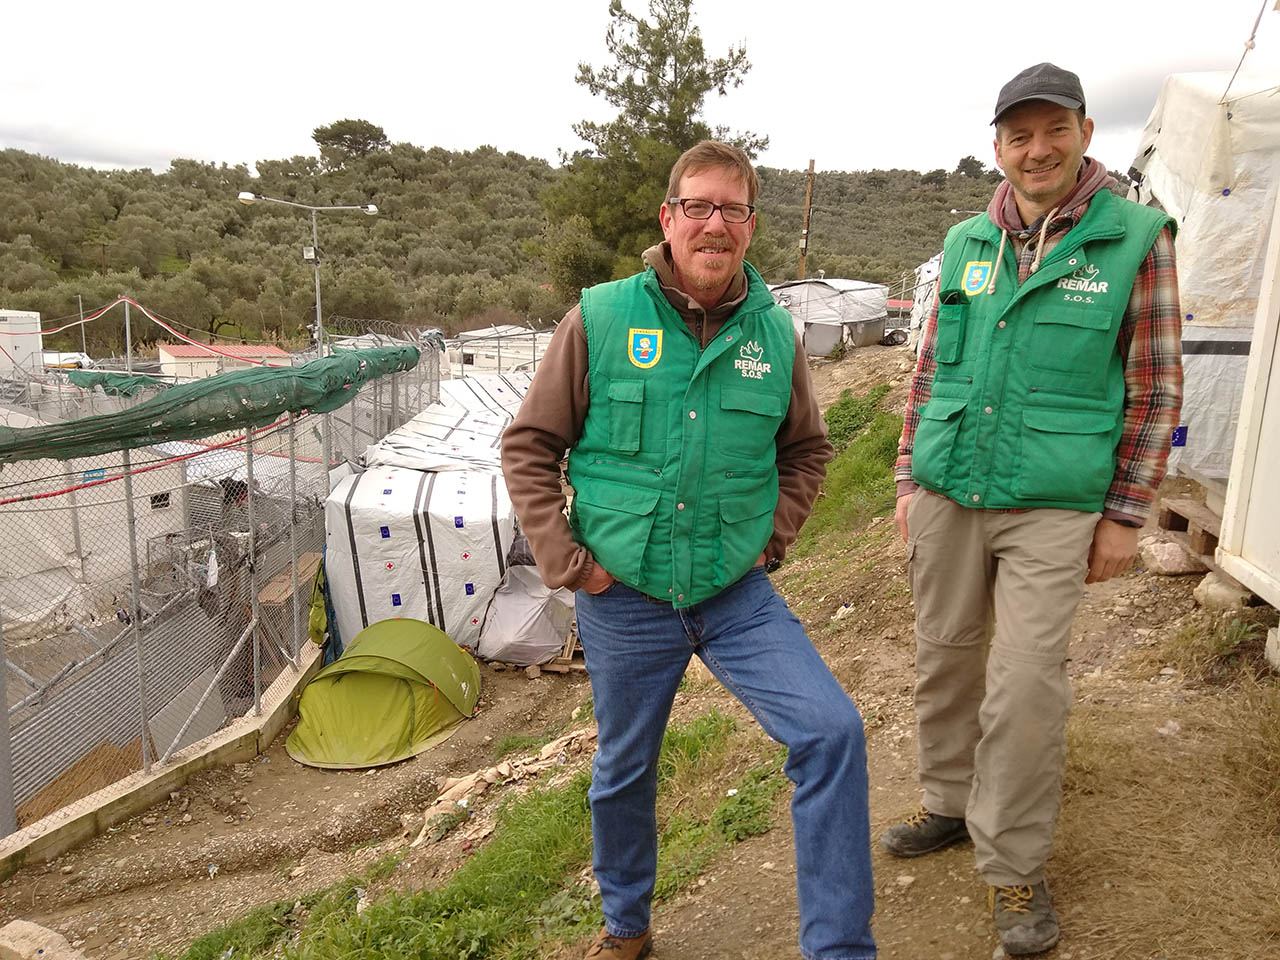 Team members at the Moria refugee camp in Greece